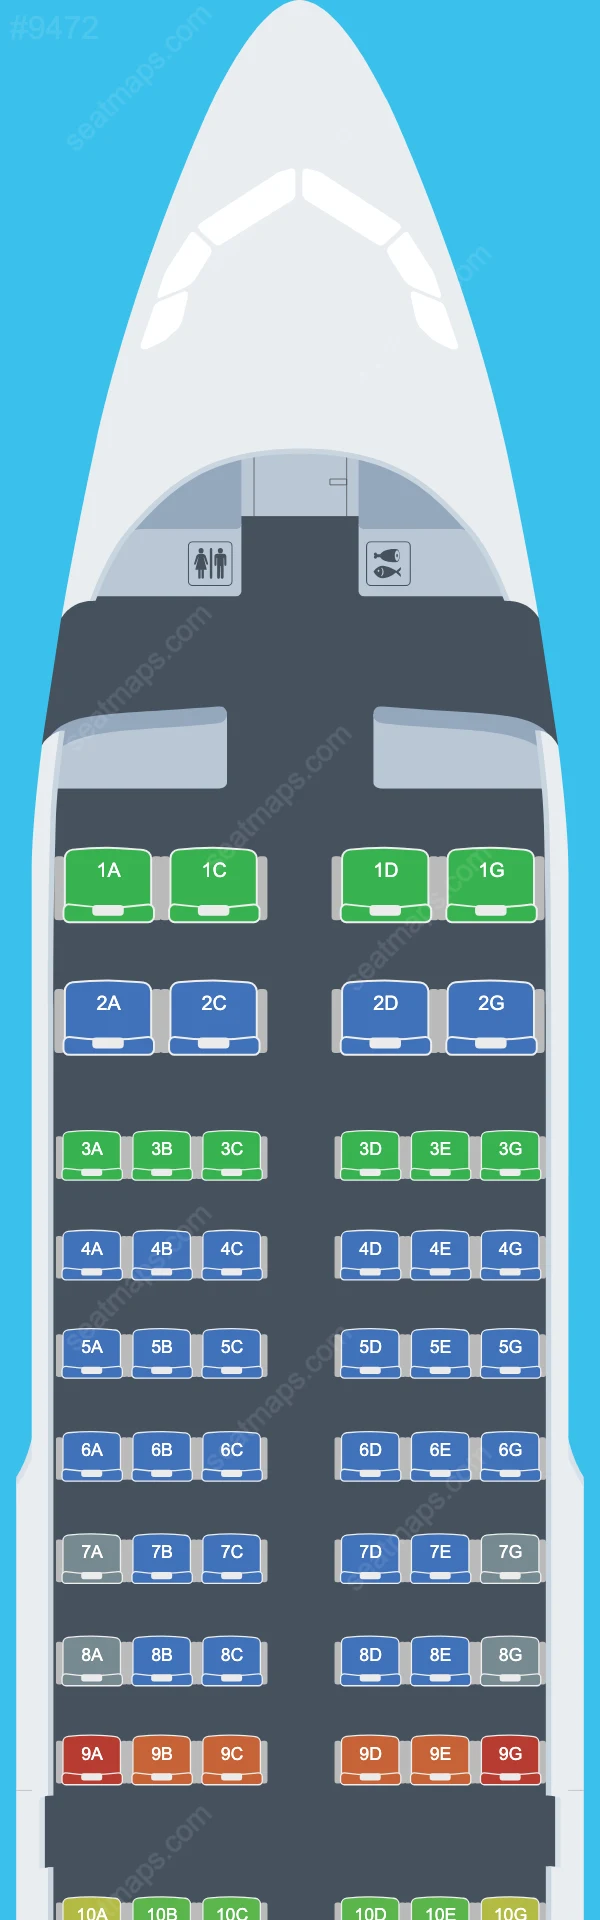 Bamboo Airways Airbus A319 Seat Maps A319-100